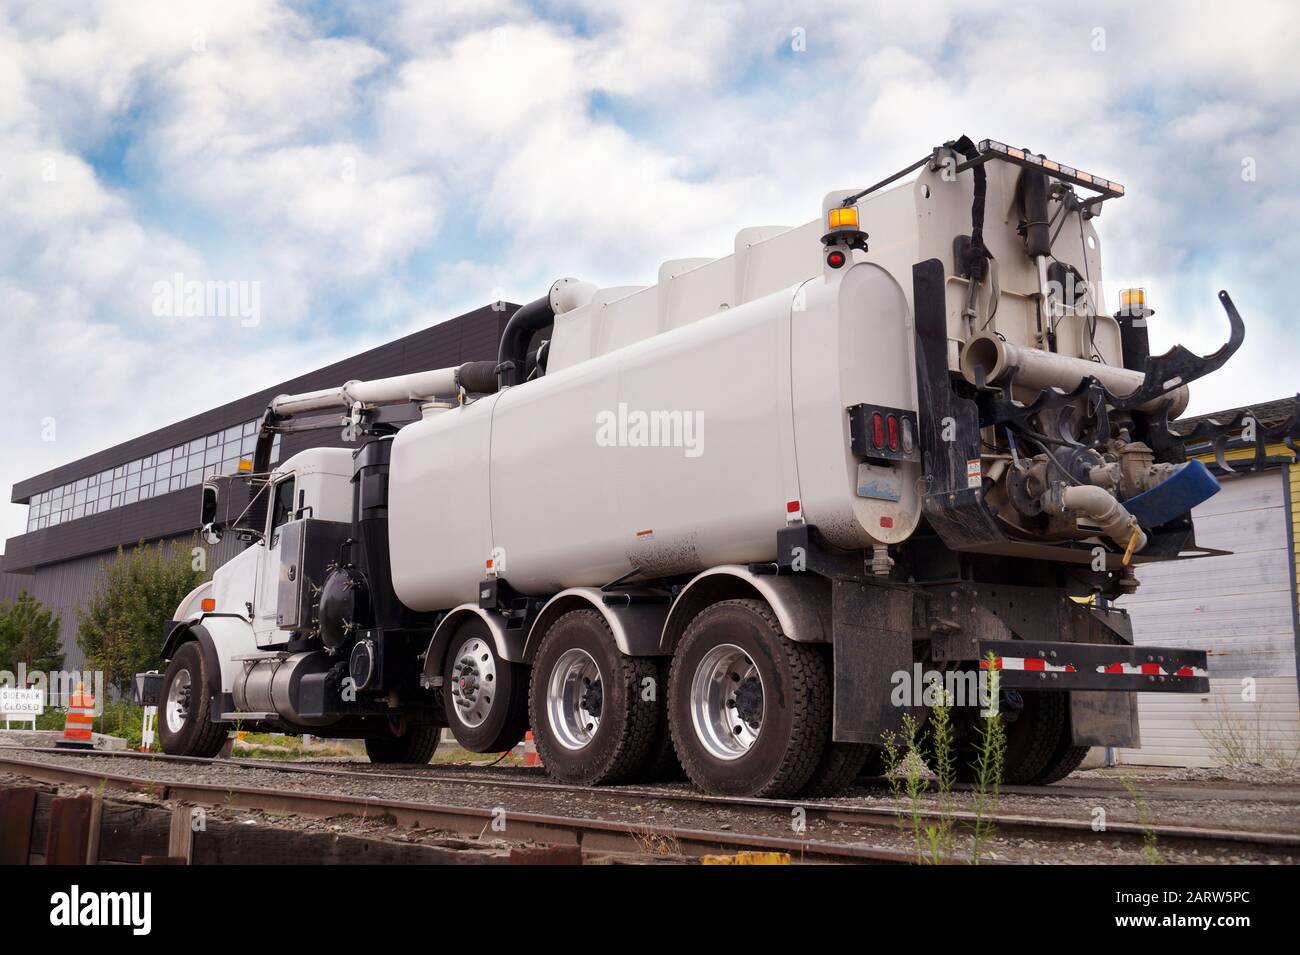 Vacuum Truck and Sewer Cleaner. Truck dedicated for catch basin cleaner. Stock Photo